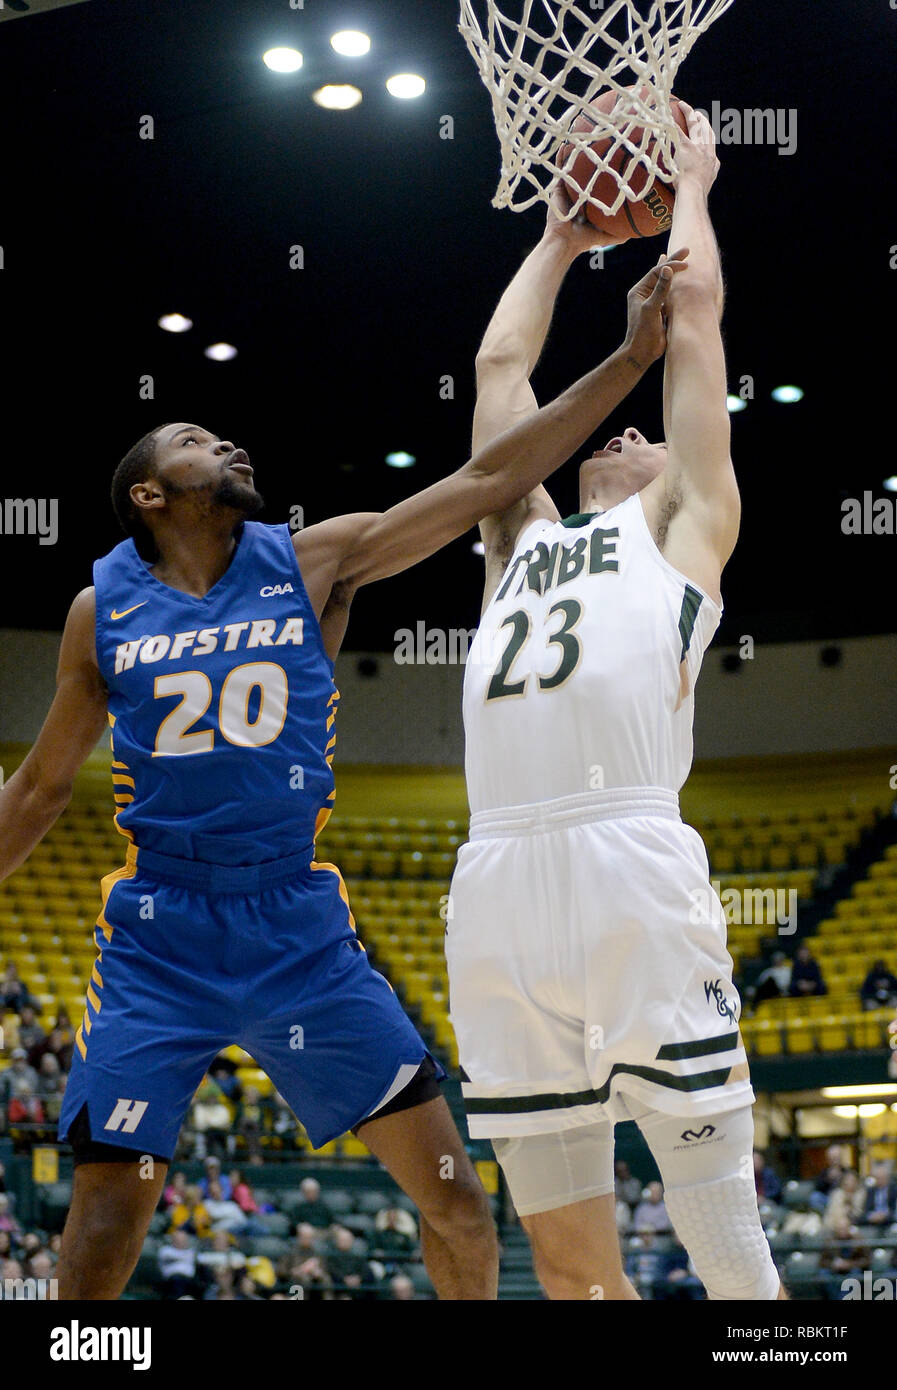 Williamsburg, VA, USA. 10th Jan, 2019. 20190110 - William and Mary forward JUSTIN PIERCE (23) grabs an offensive rebound against Hofstra guard JALEN RAY (20) in the first half at Kaplan Arena in Williamsburg, Va. Credit: Chuck Myers/ZUMA Wire/Alamy Live News Stock Photo